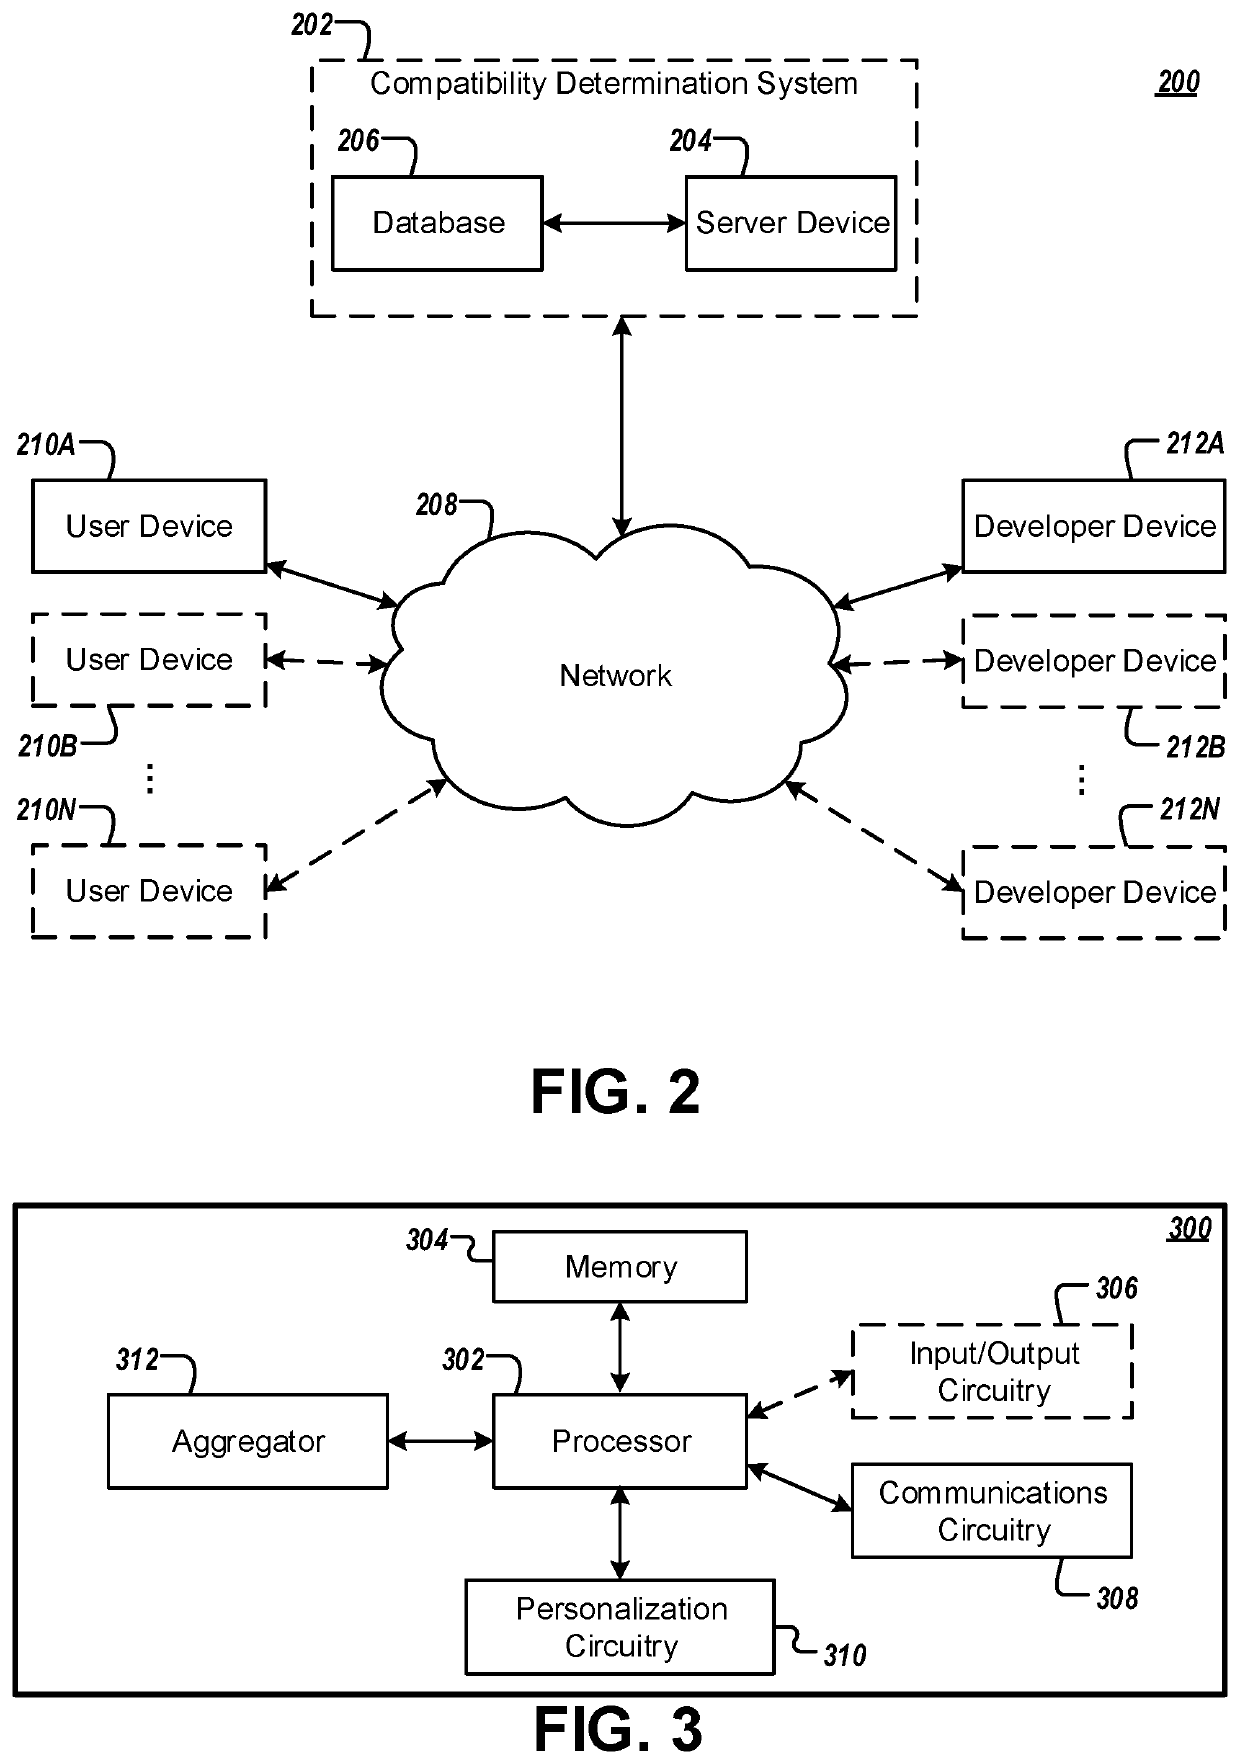 System and apparatus for automated evaluation of compatibility of data structures and user devices based on explicit user feedback